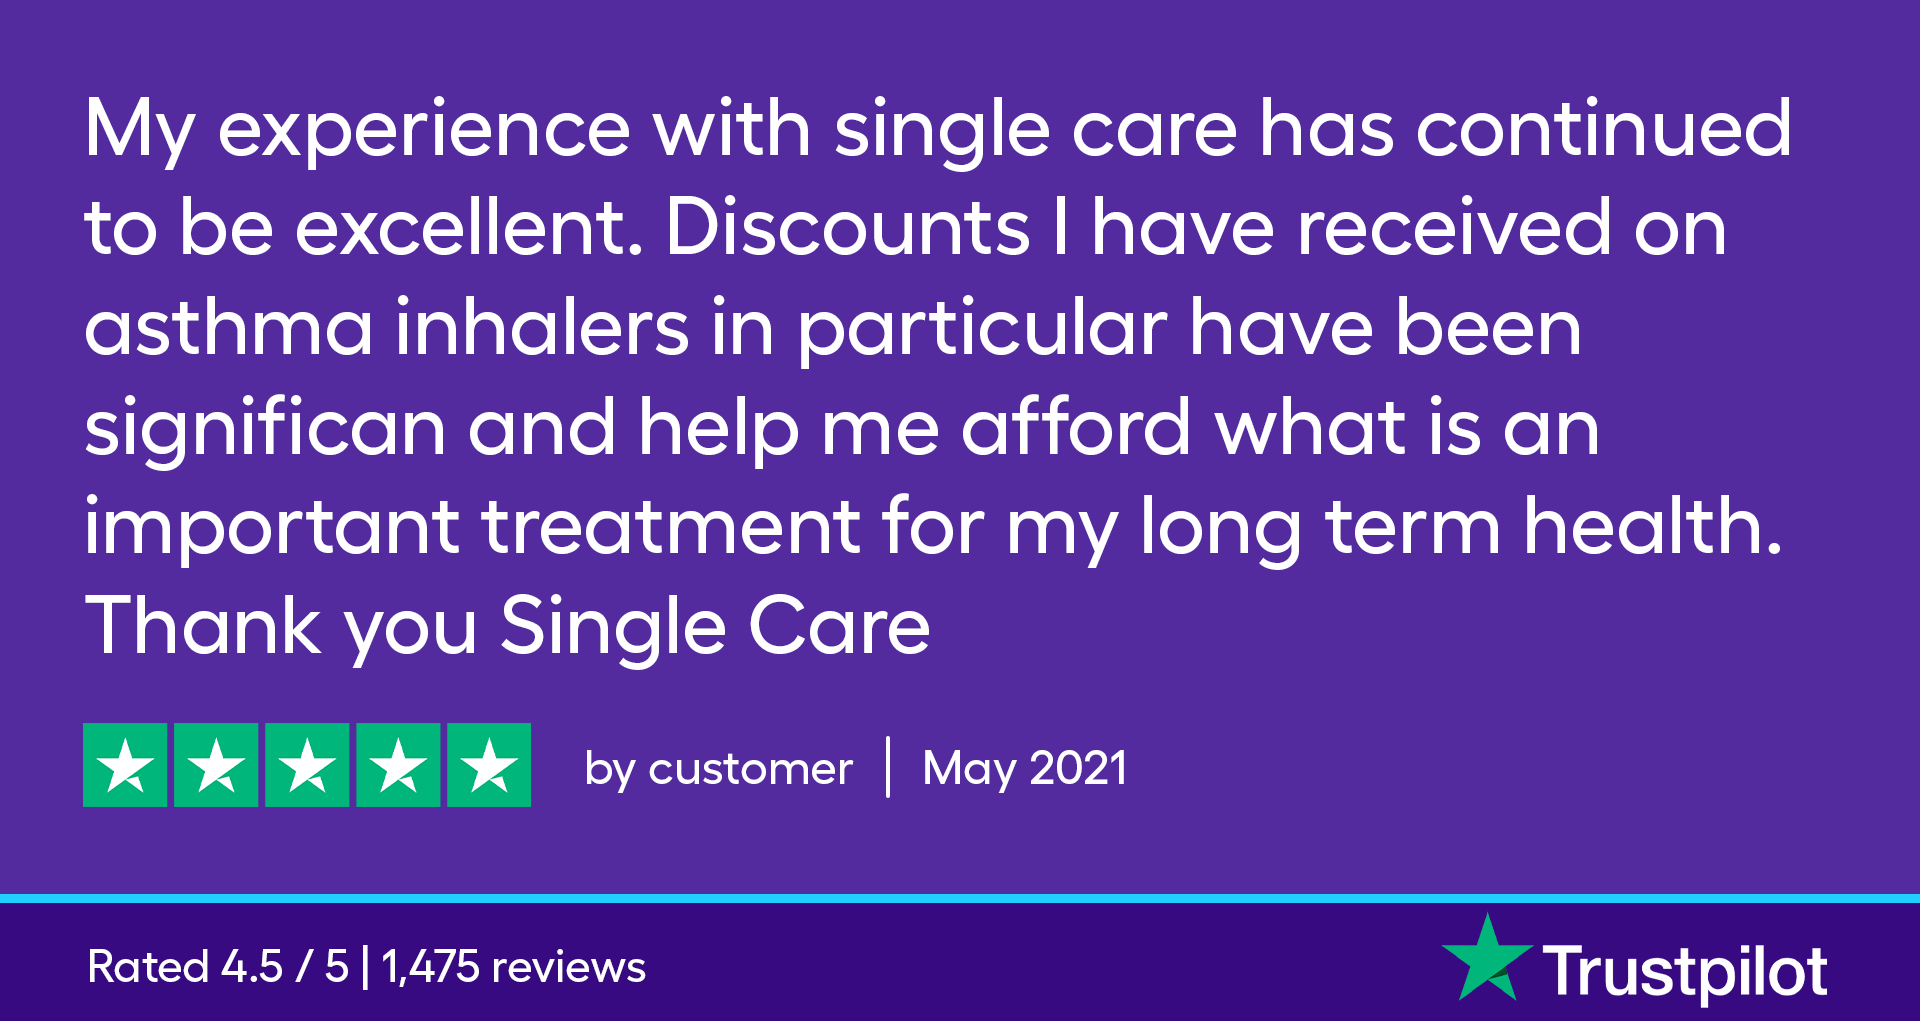 My experience with SingleCare has continued to be excellent. Discounts that I have received on asthma inhalers in particular have been significant and have helped me afford what is an important treatment for my long term health. Thank you SingleCare.